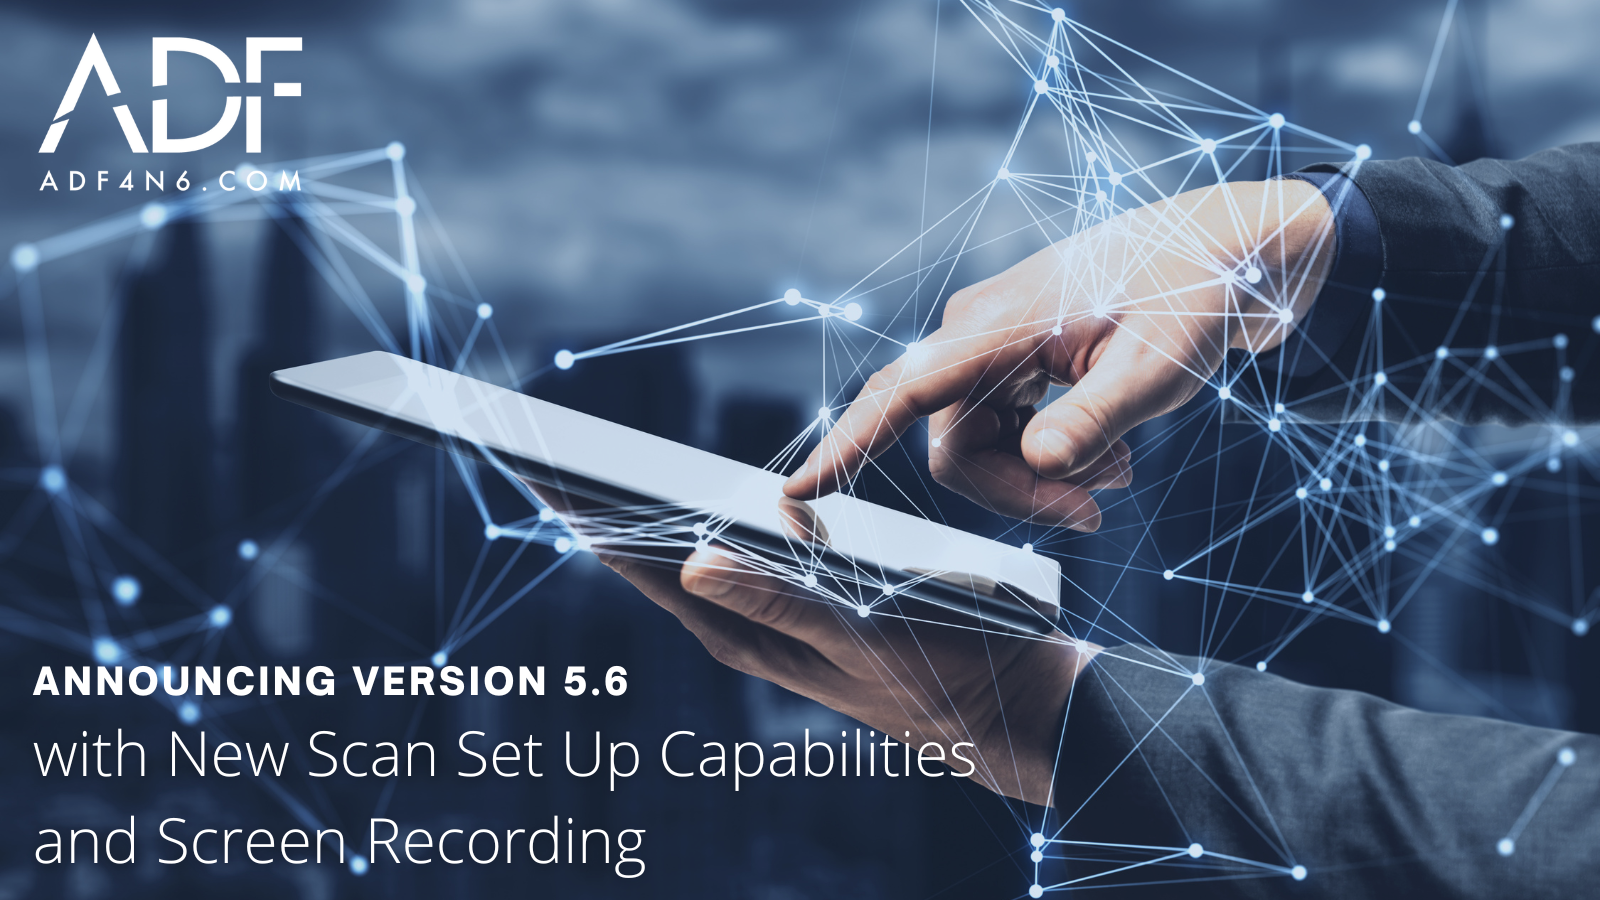 Announcing New Scan and Screen Recording Features with Version 5.6